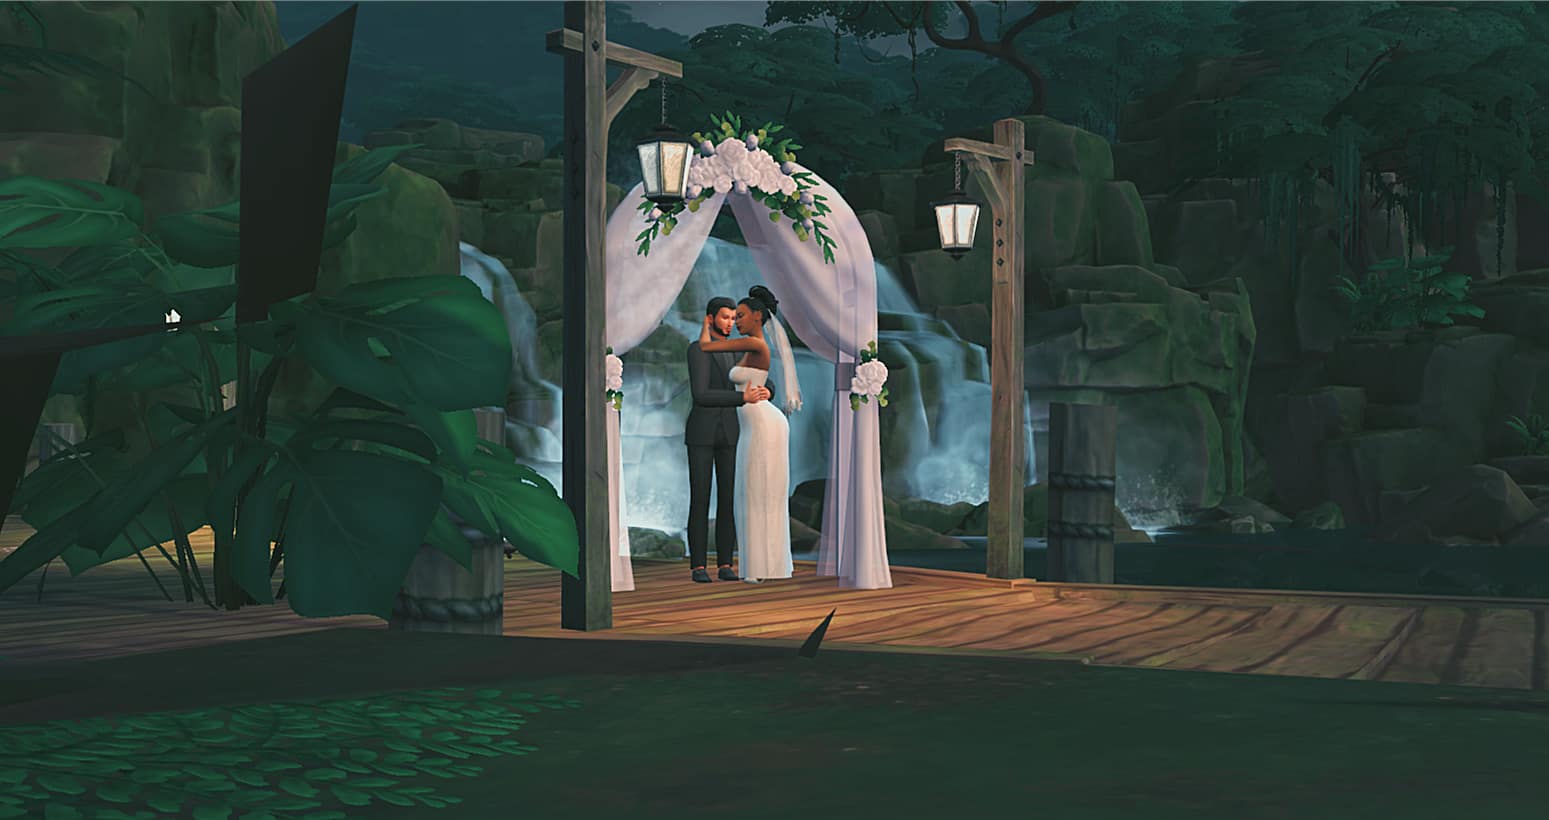 Sims 4 My Wedding Stories trailer details Extra Time Media